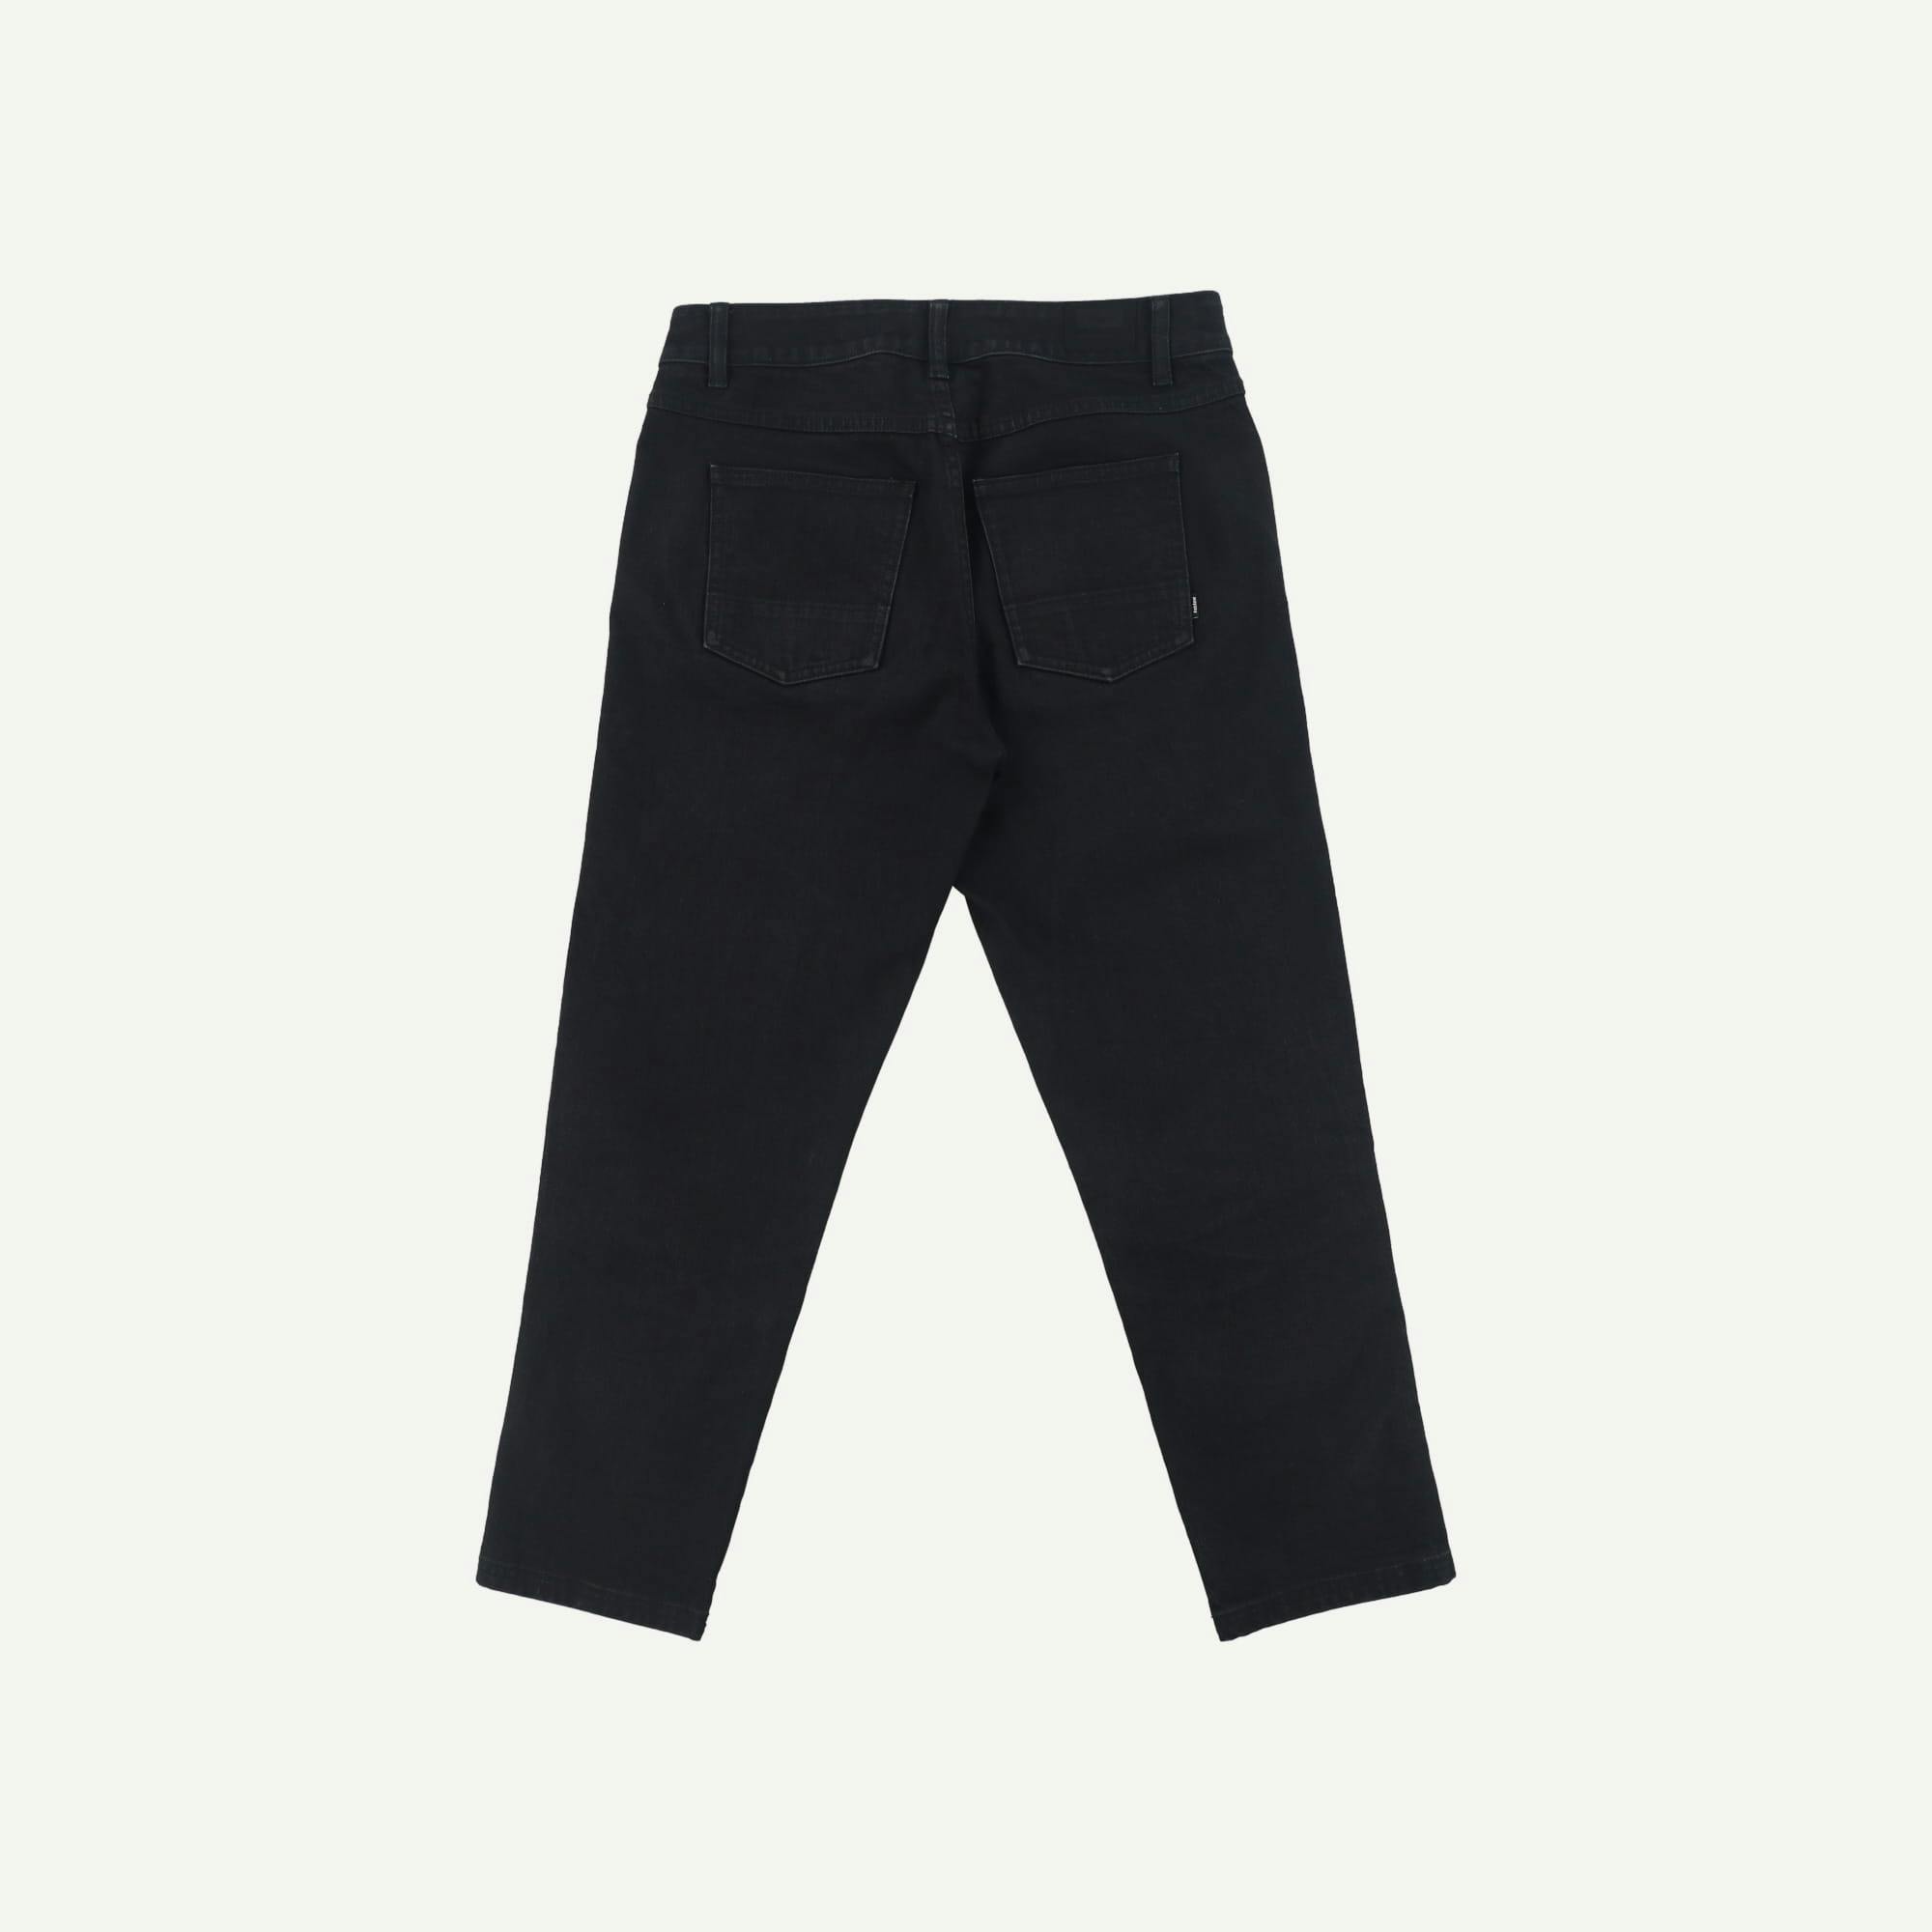 Finisterre As new Black Jeans